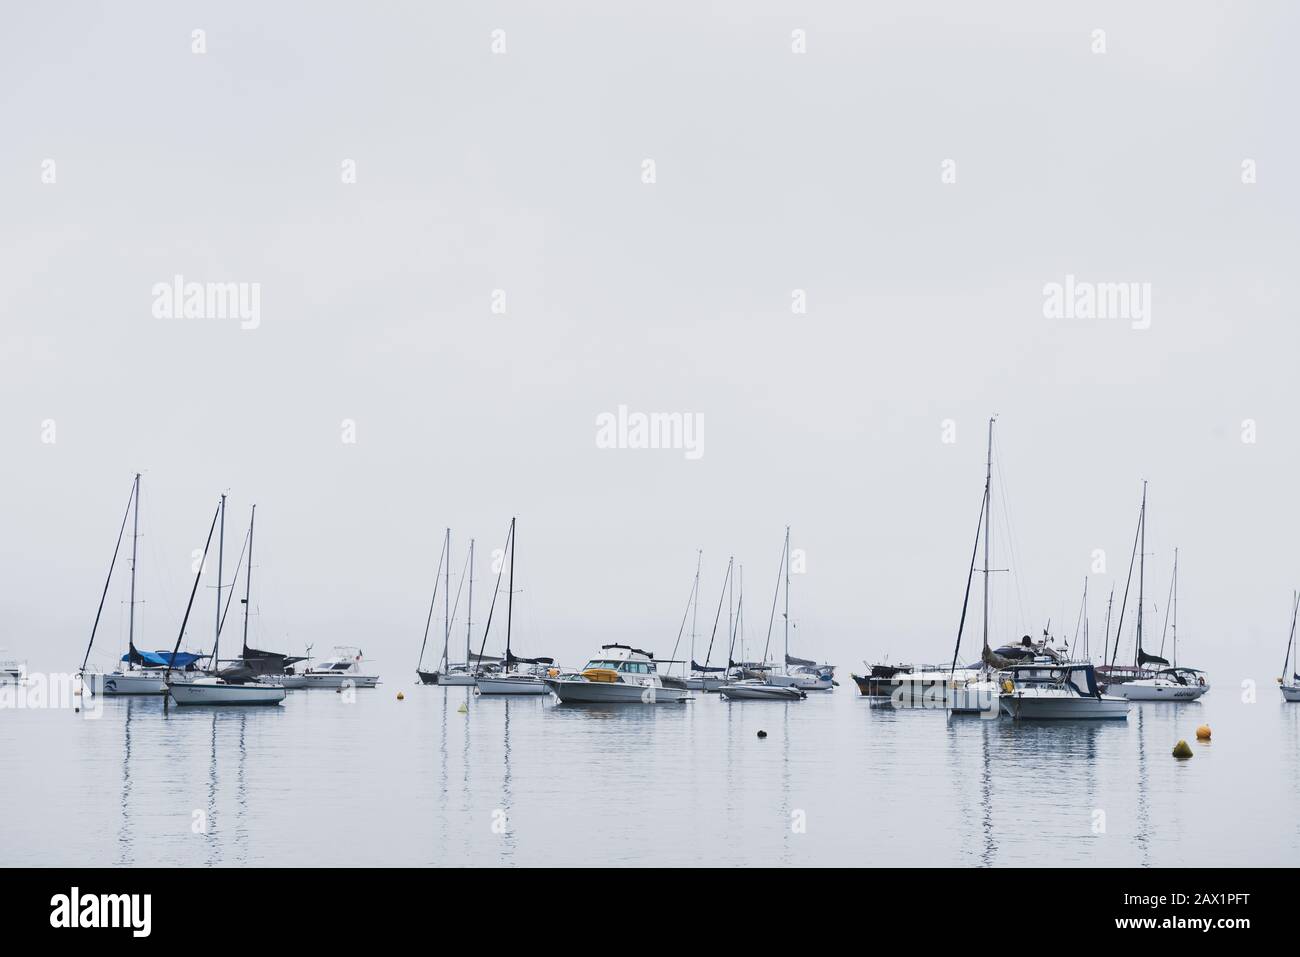 Boats moored during a misty cloudy day at Ilhabela, São Paulo, Brazil Stock Photo